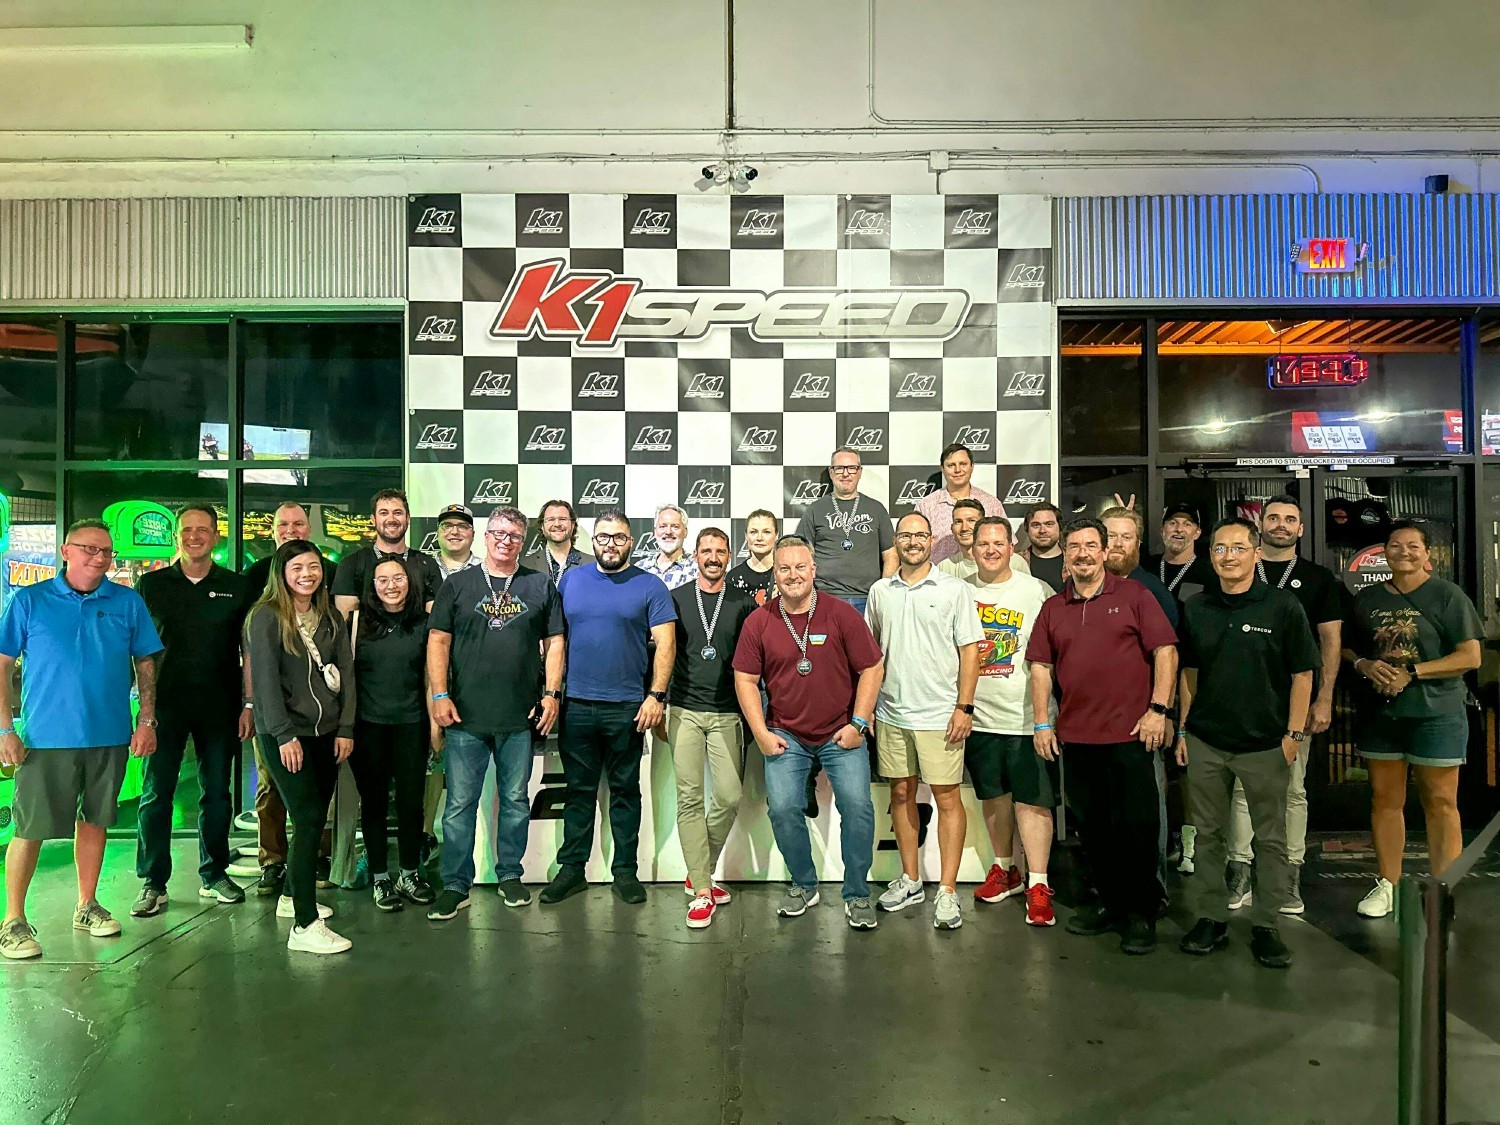 Members of our team on a go-kart racing outing.